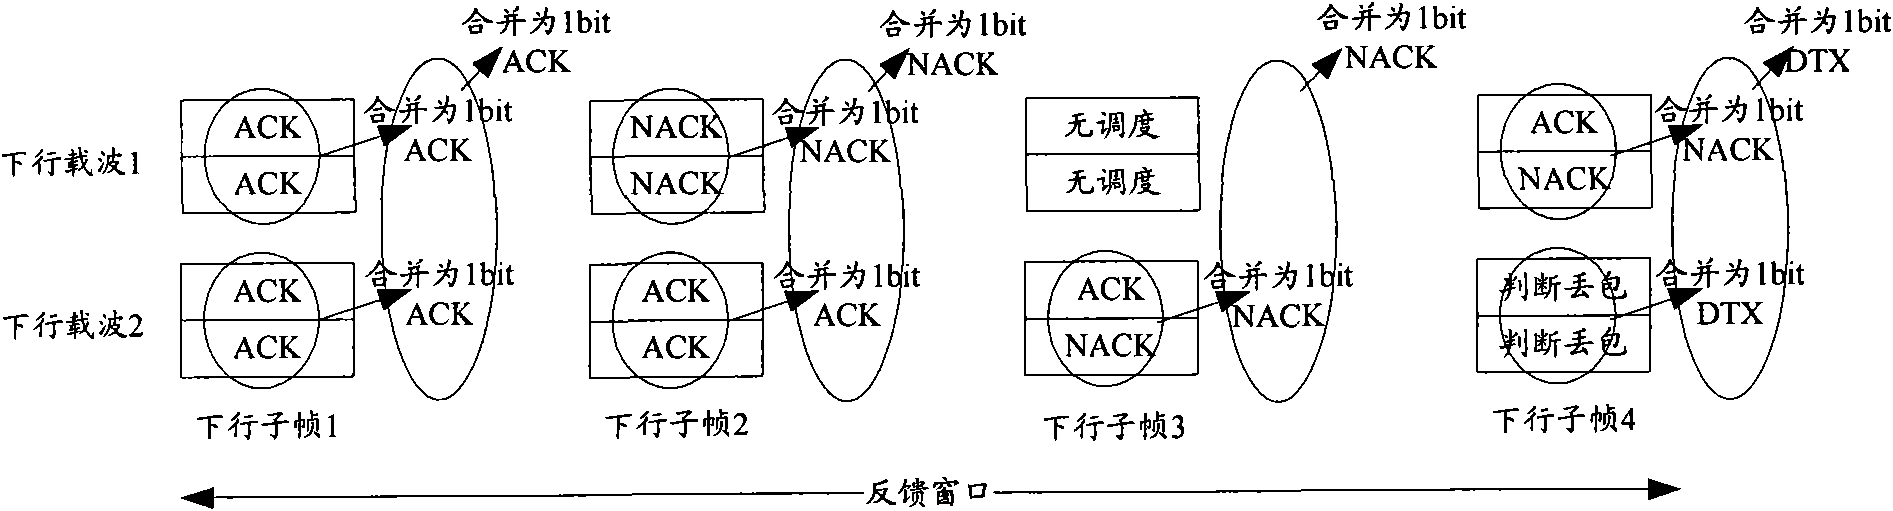 Channel resource determination method of ACK/NACK feedback information and equipment